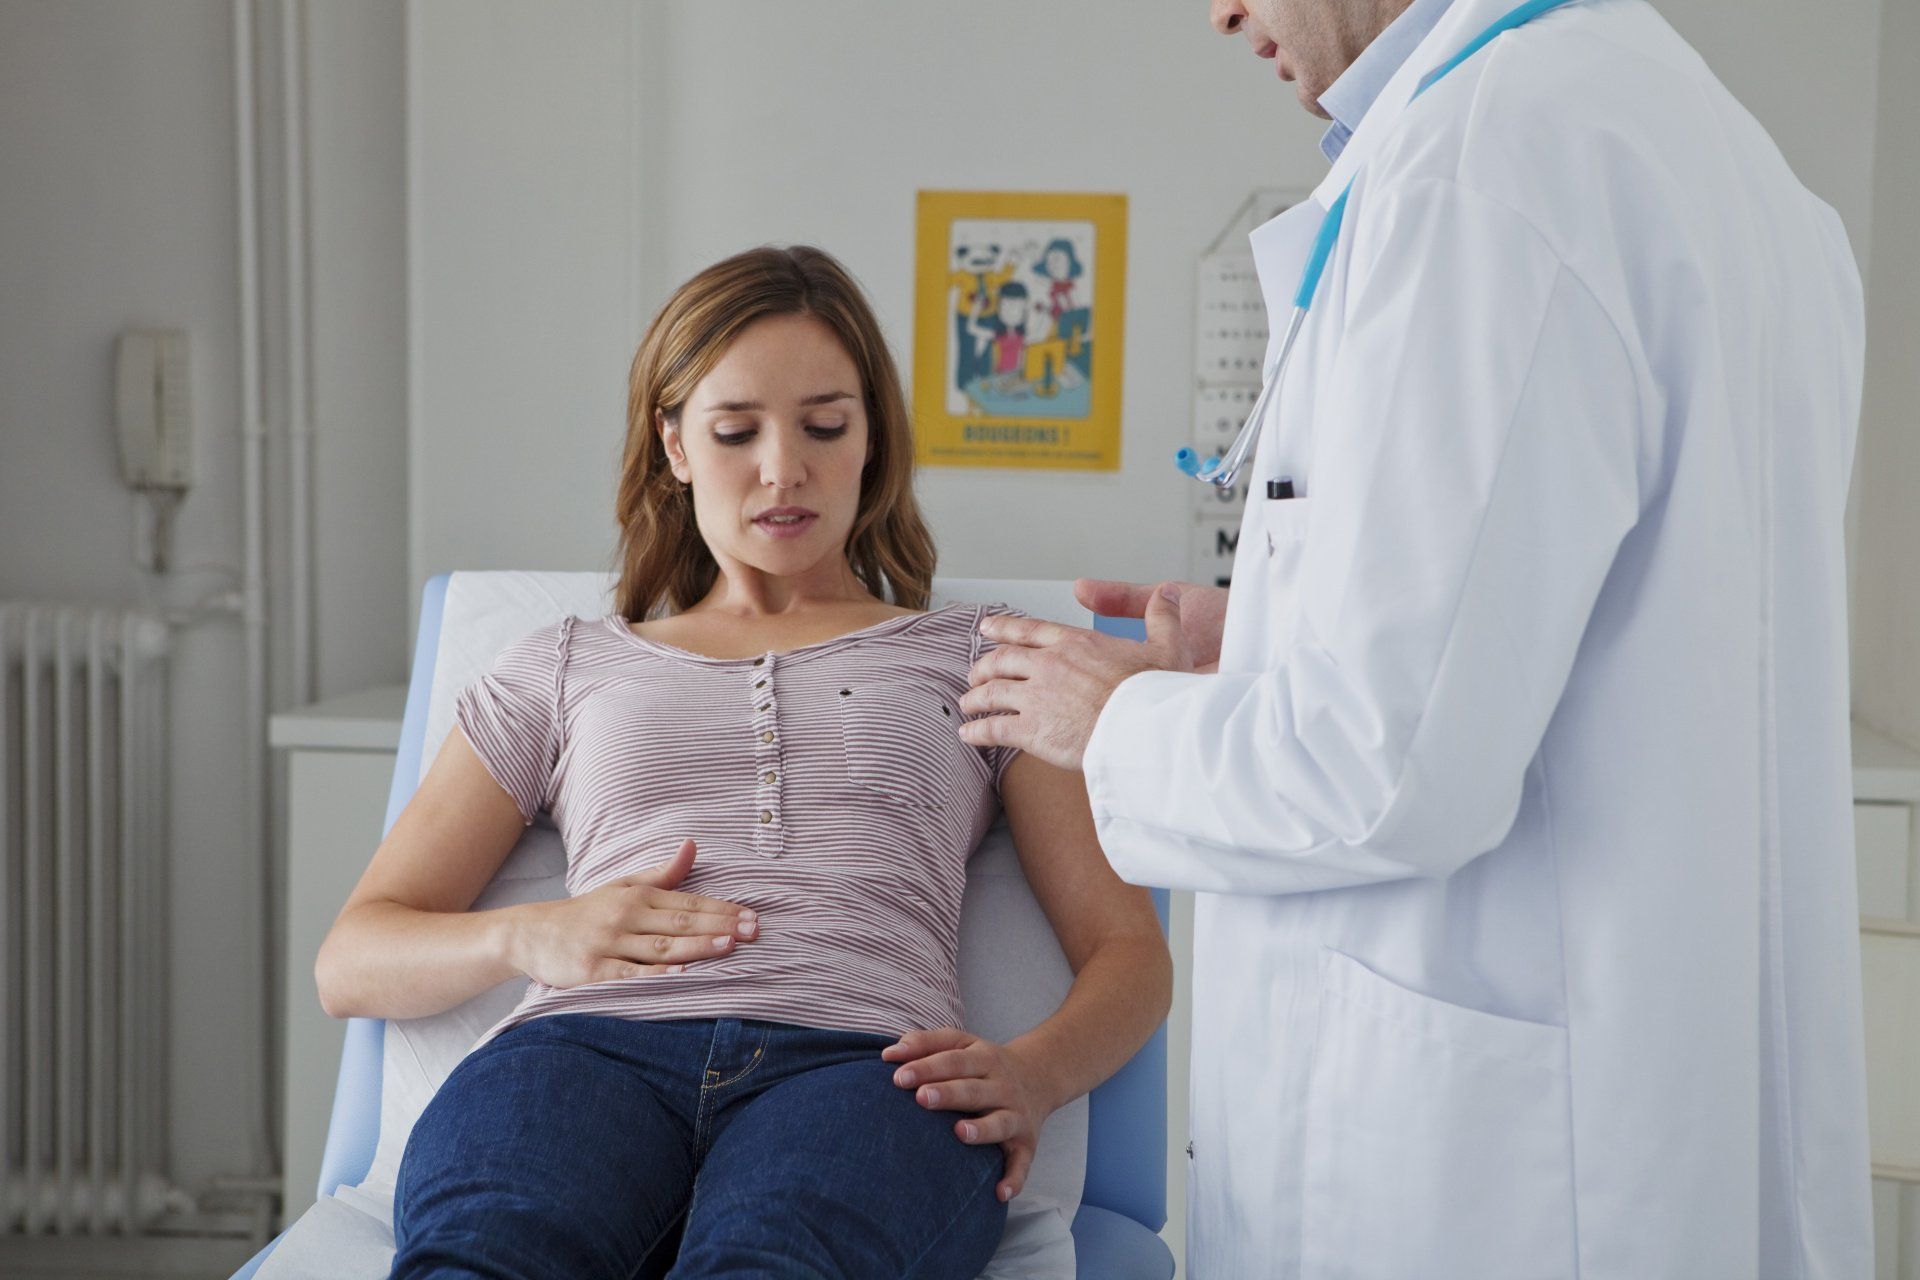 4 Common Questions About Ulcerative Colitis and the Answers